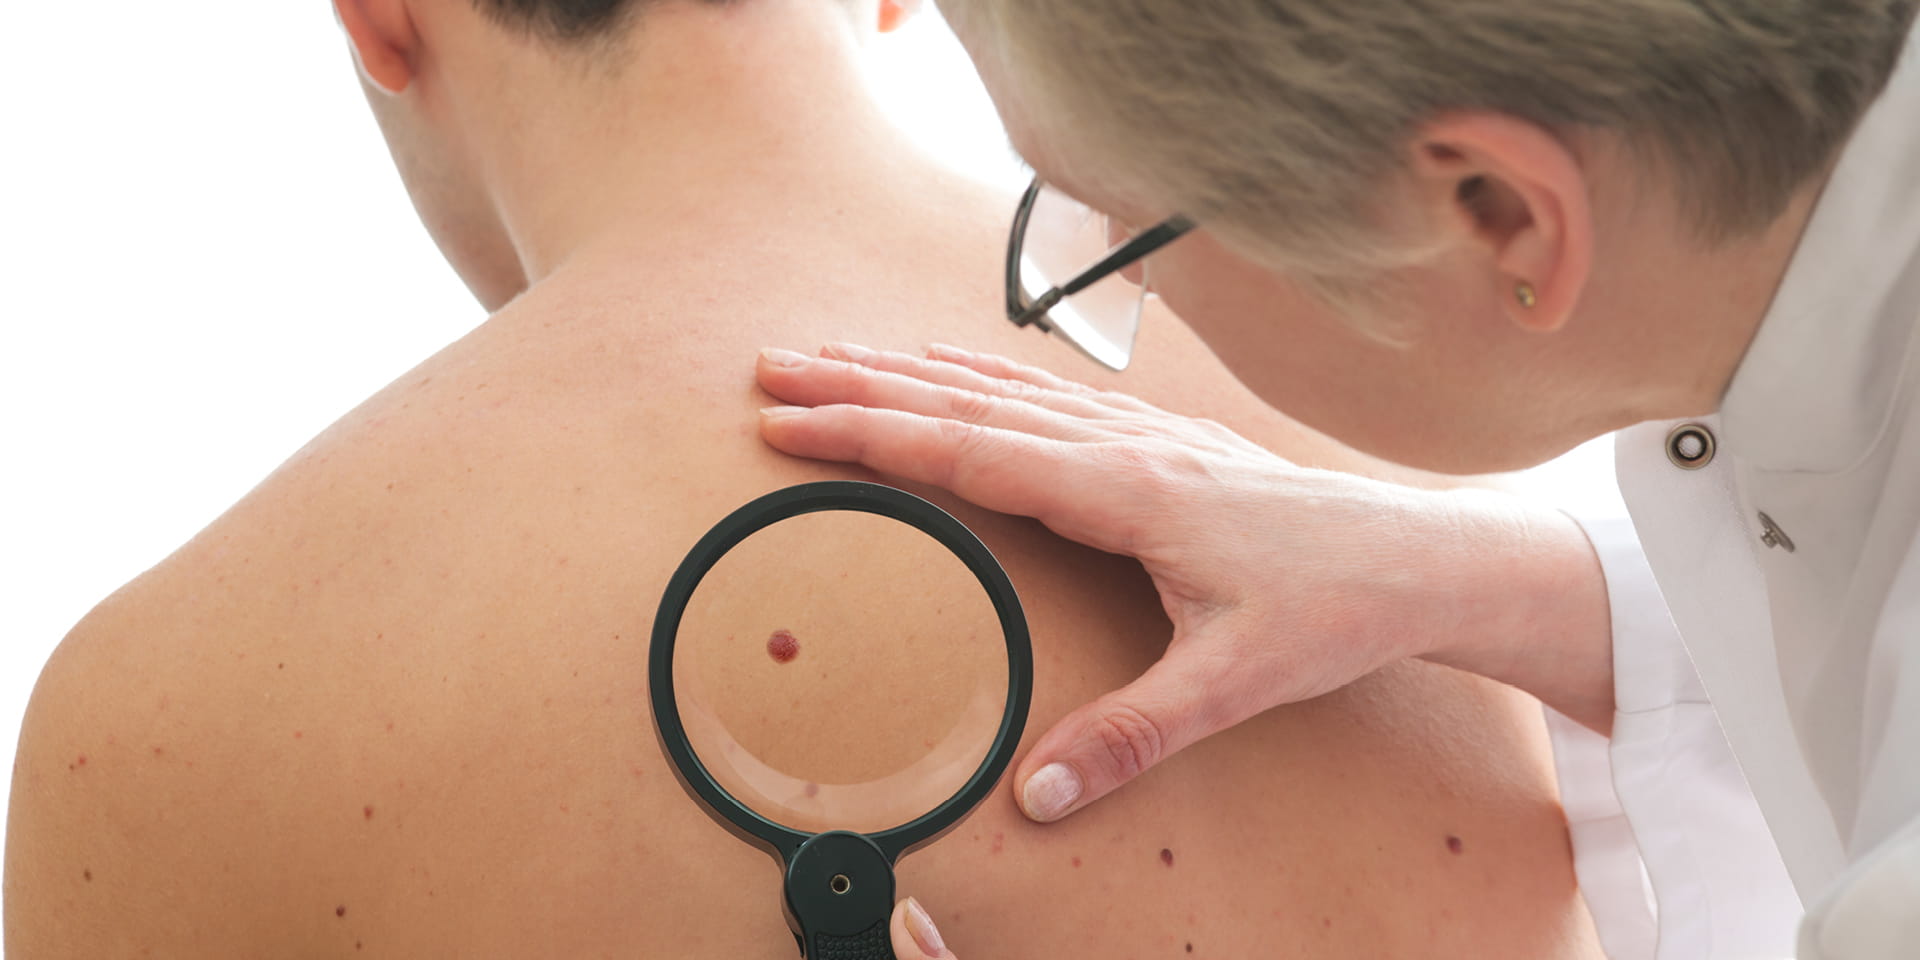 dermatologist examining a mole on patient's back